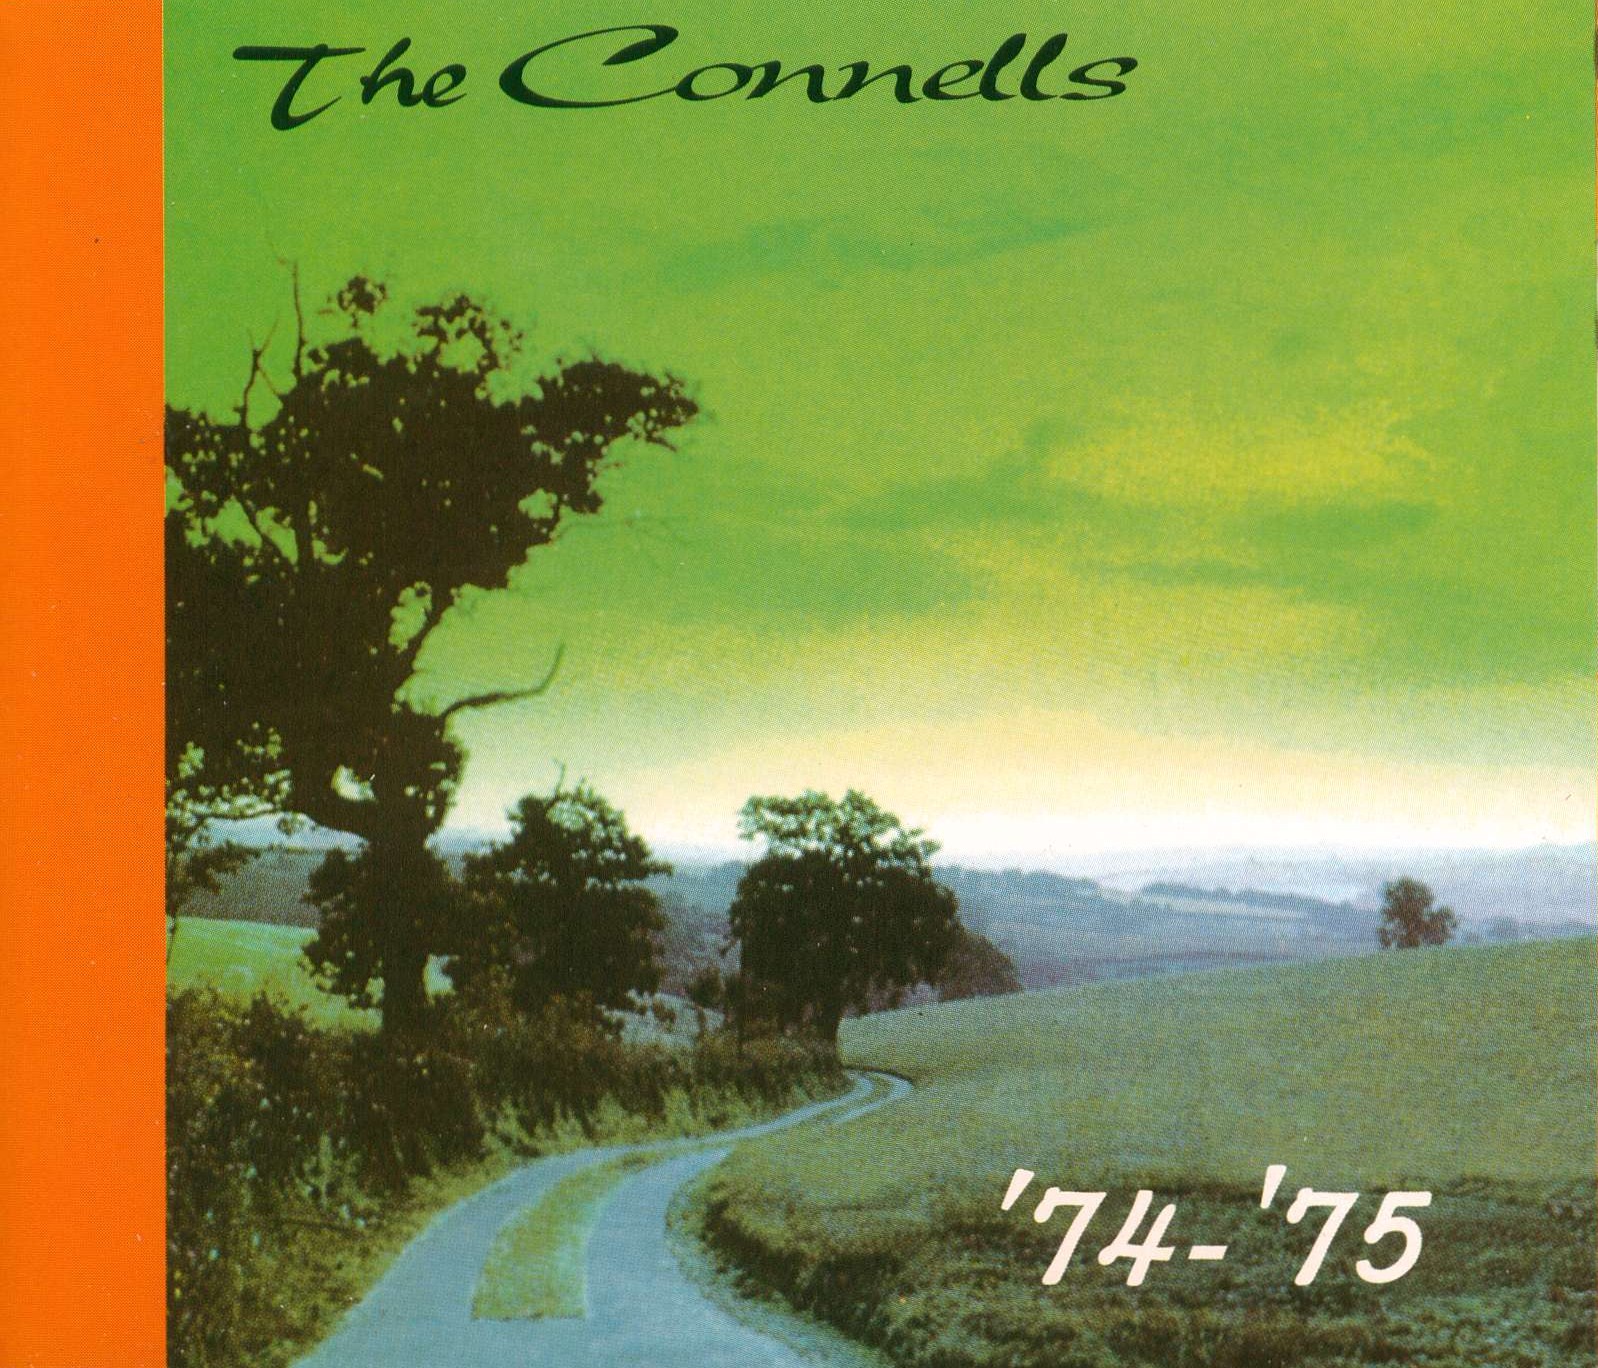 20 years since The Connells reached the top with ’74-’75